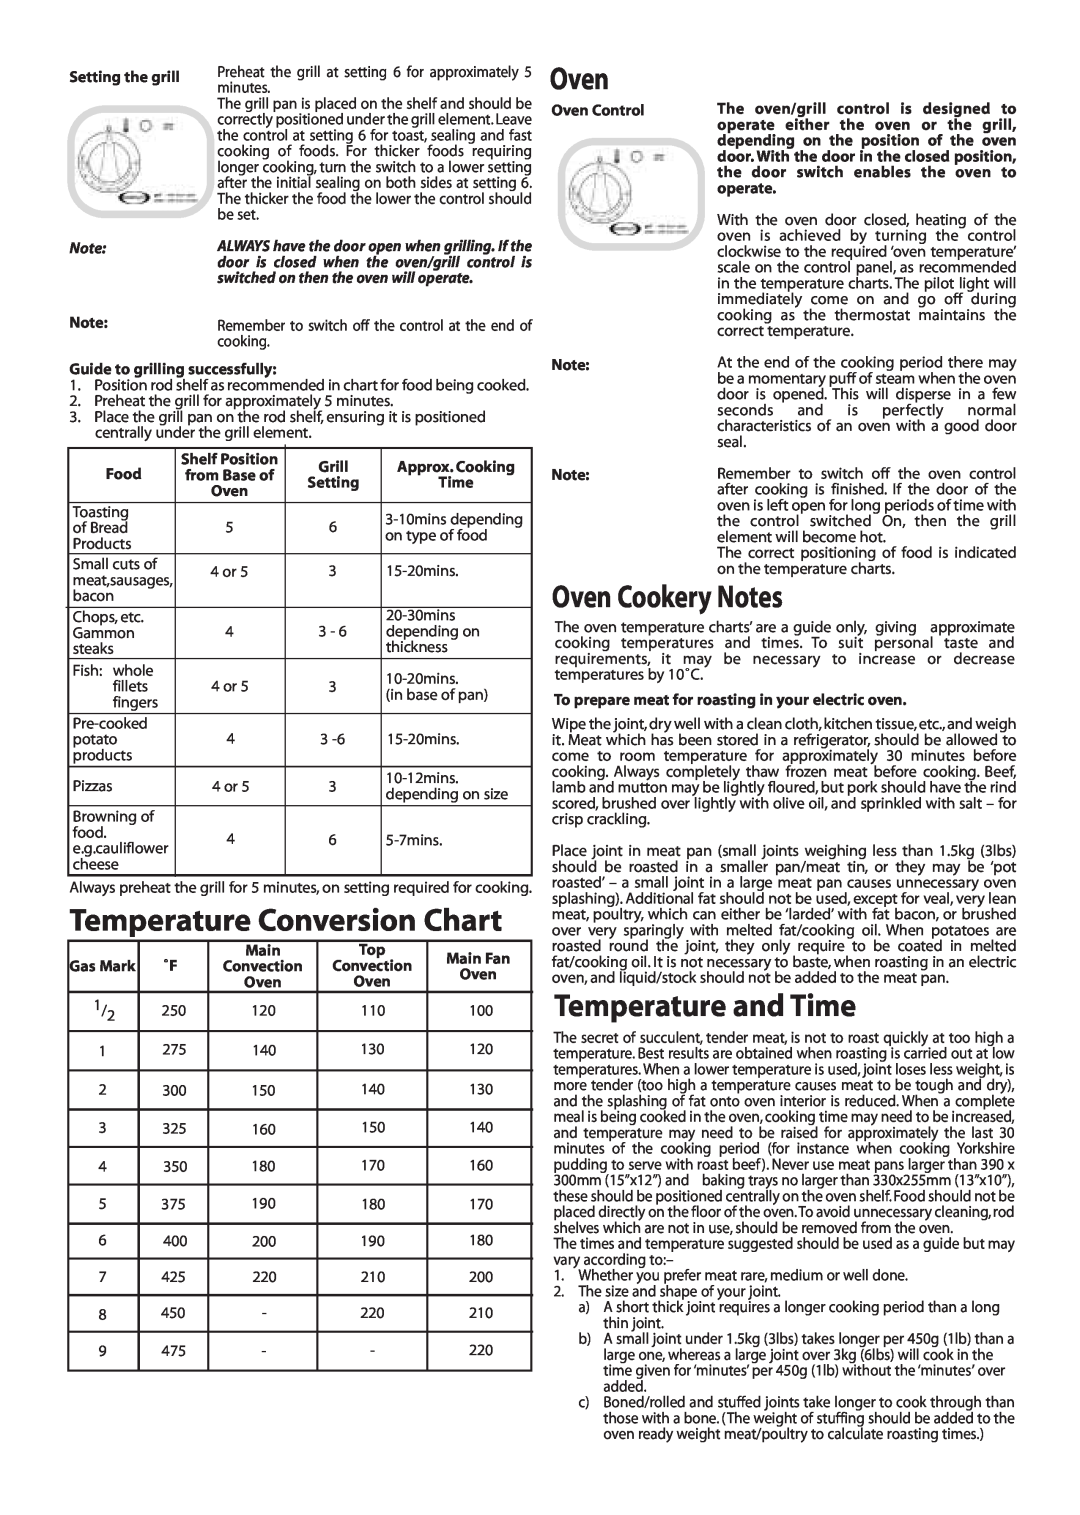 Jackson J051E installation instructions Temperature Conversion Chart, Oven Cookery Notes, Temperature and Time 